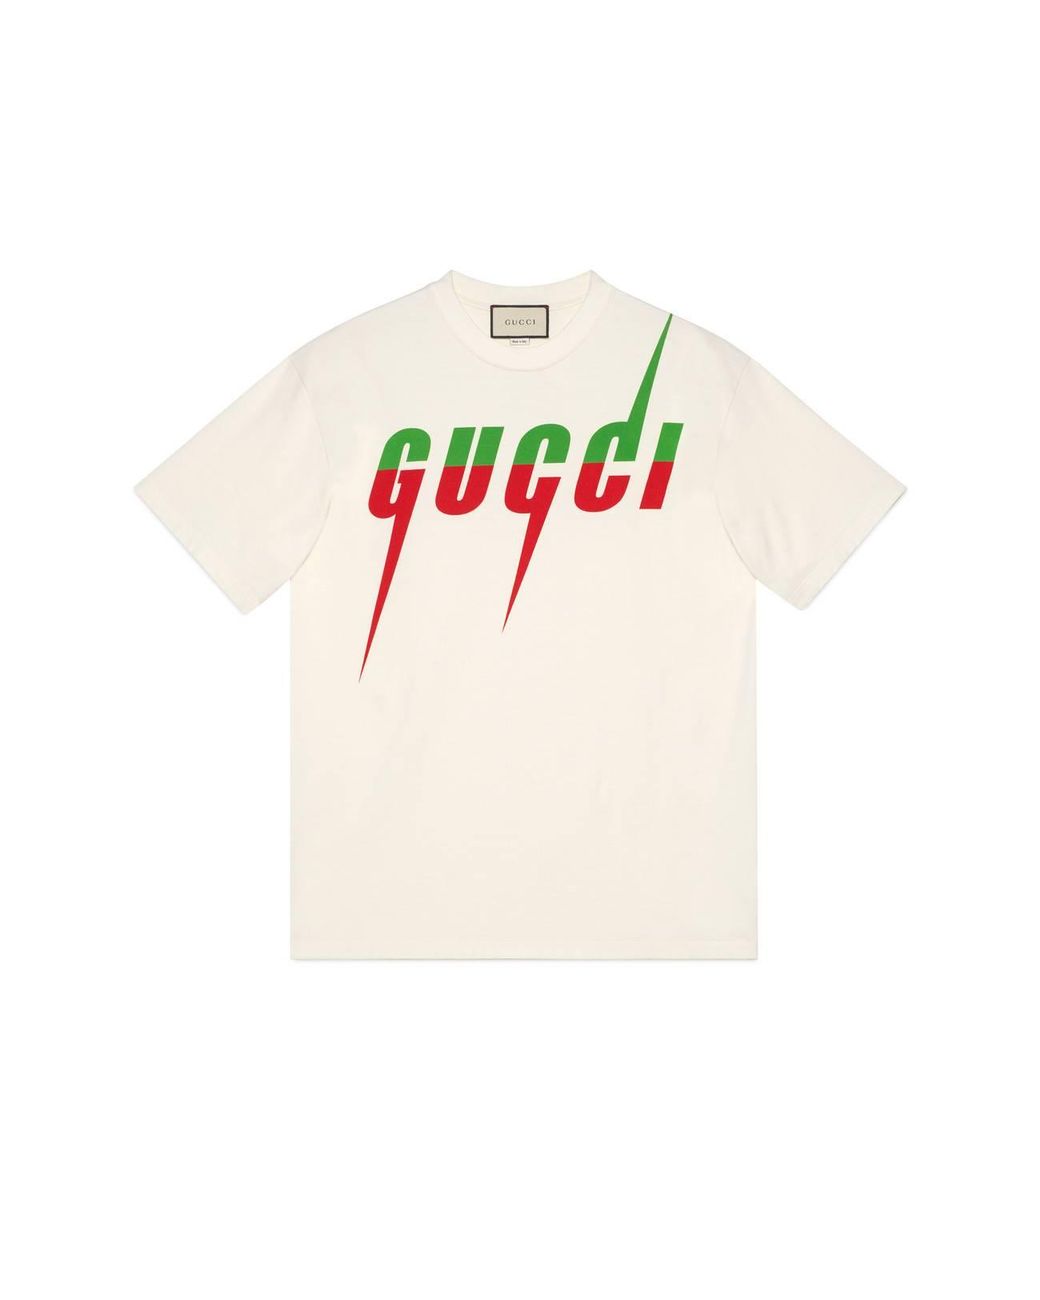 Gucci T-shirt With Blade Print in White for Men - Lyst